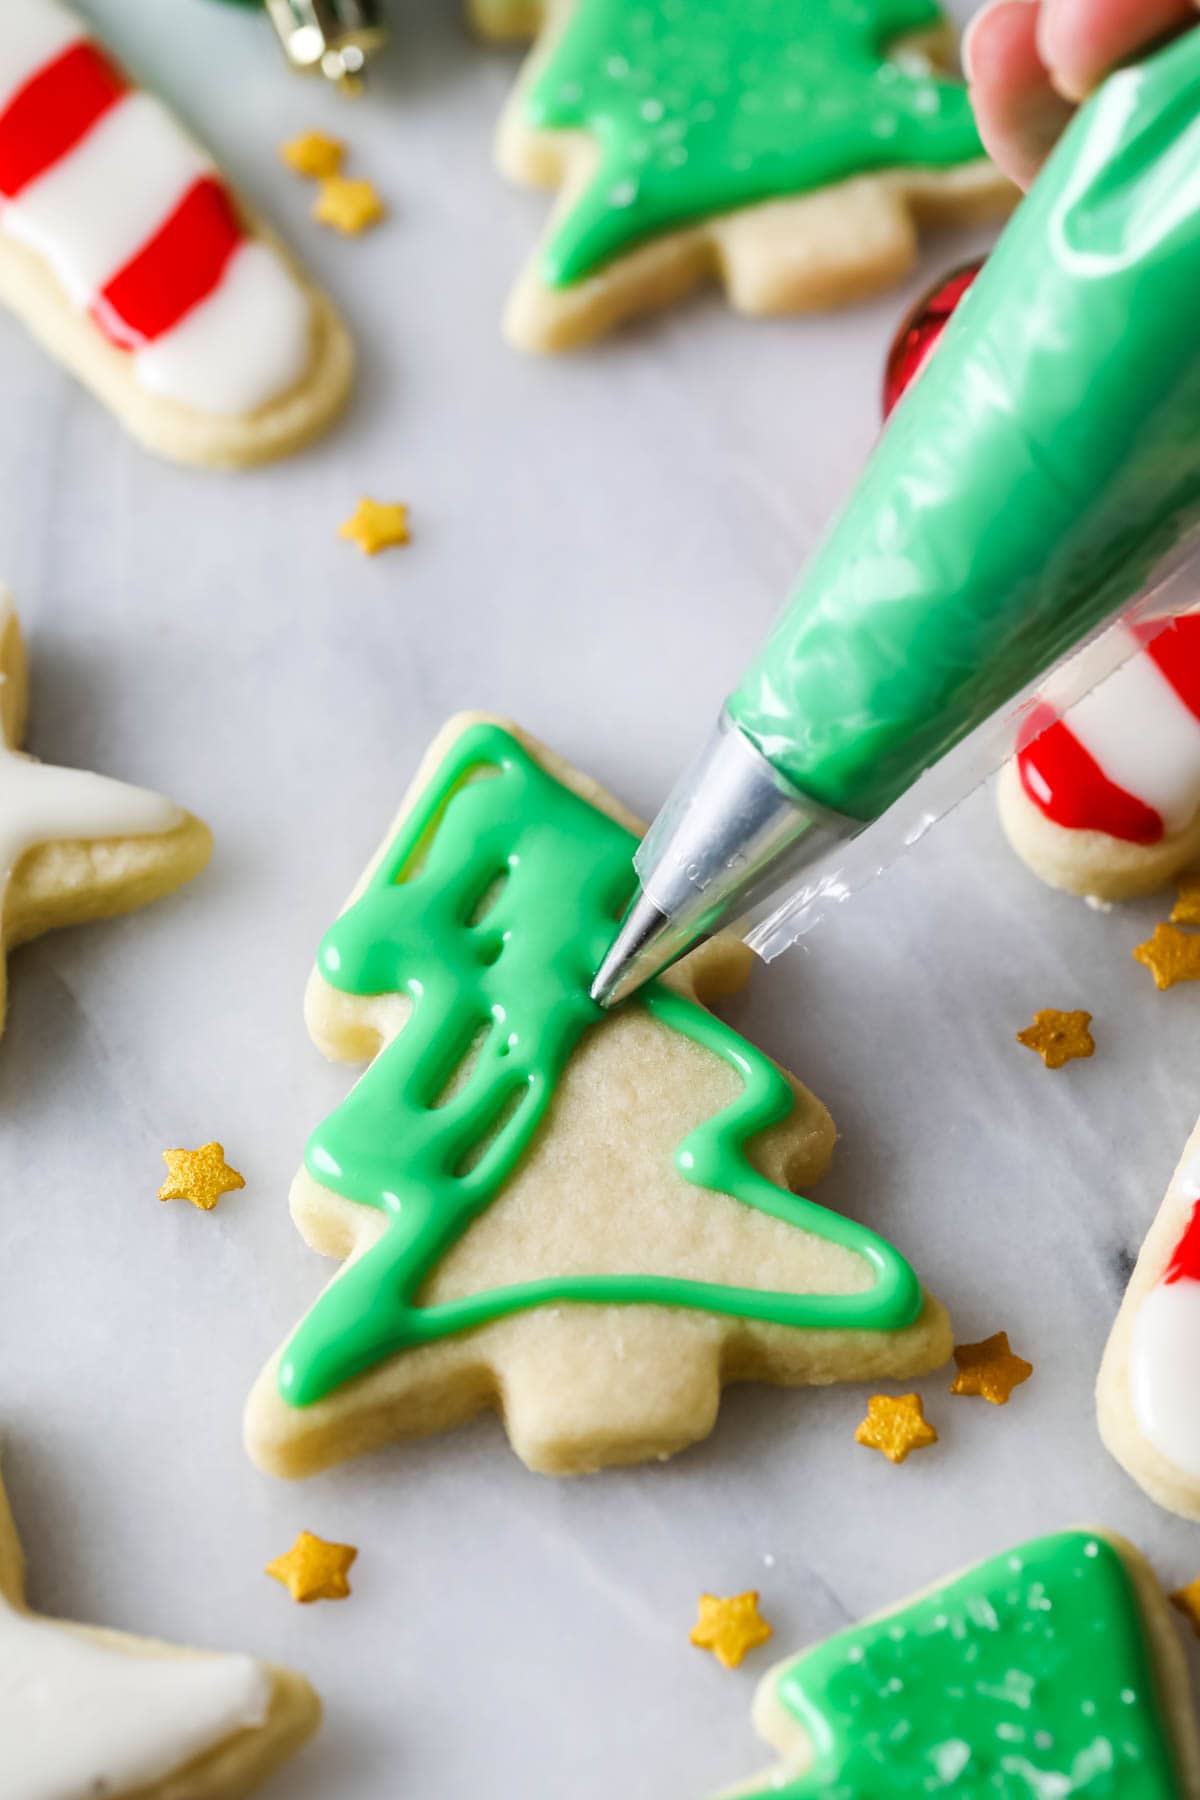 Green icing being piped onto a christmas tree shaped cookie.